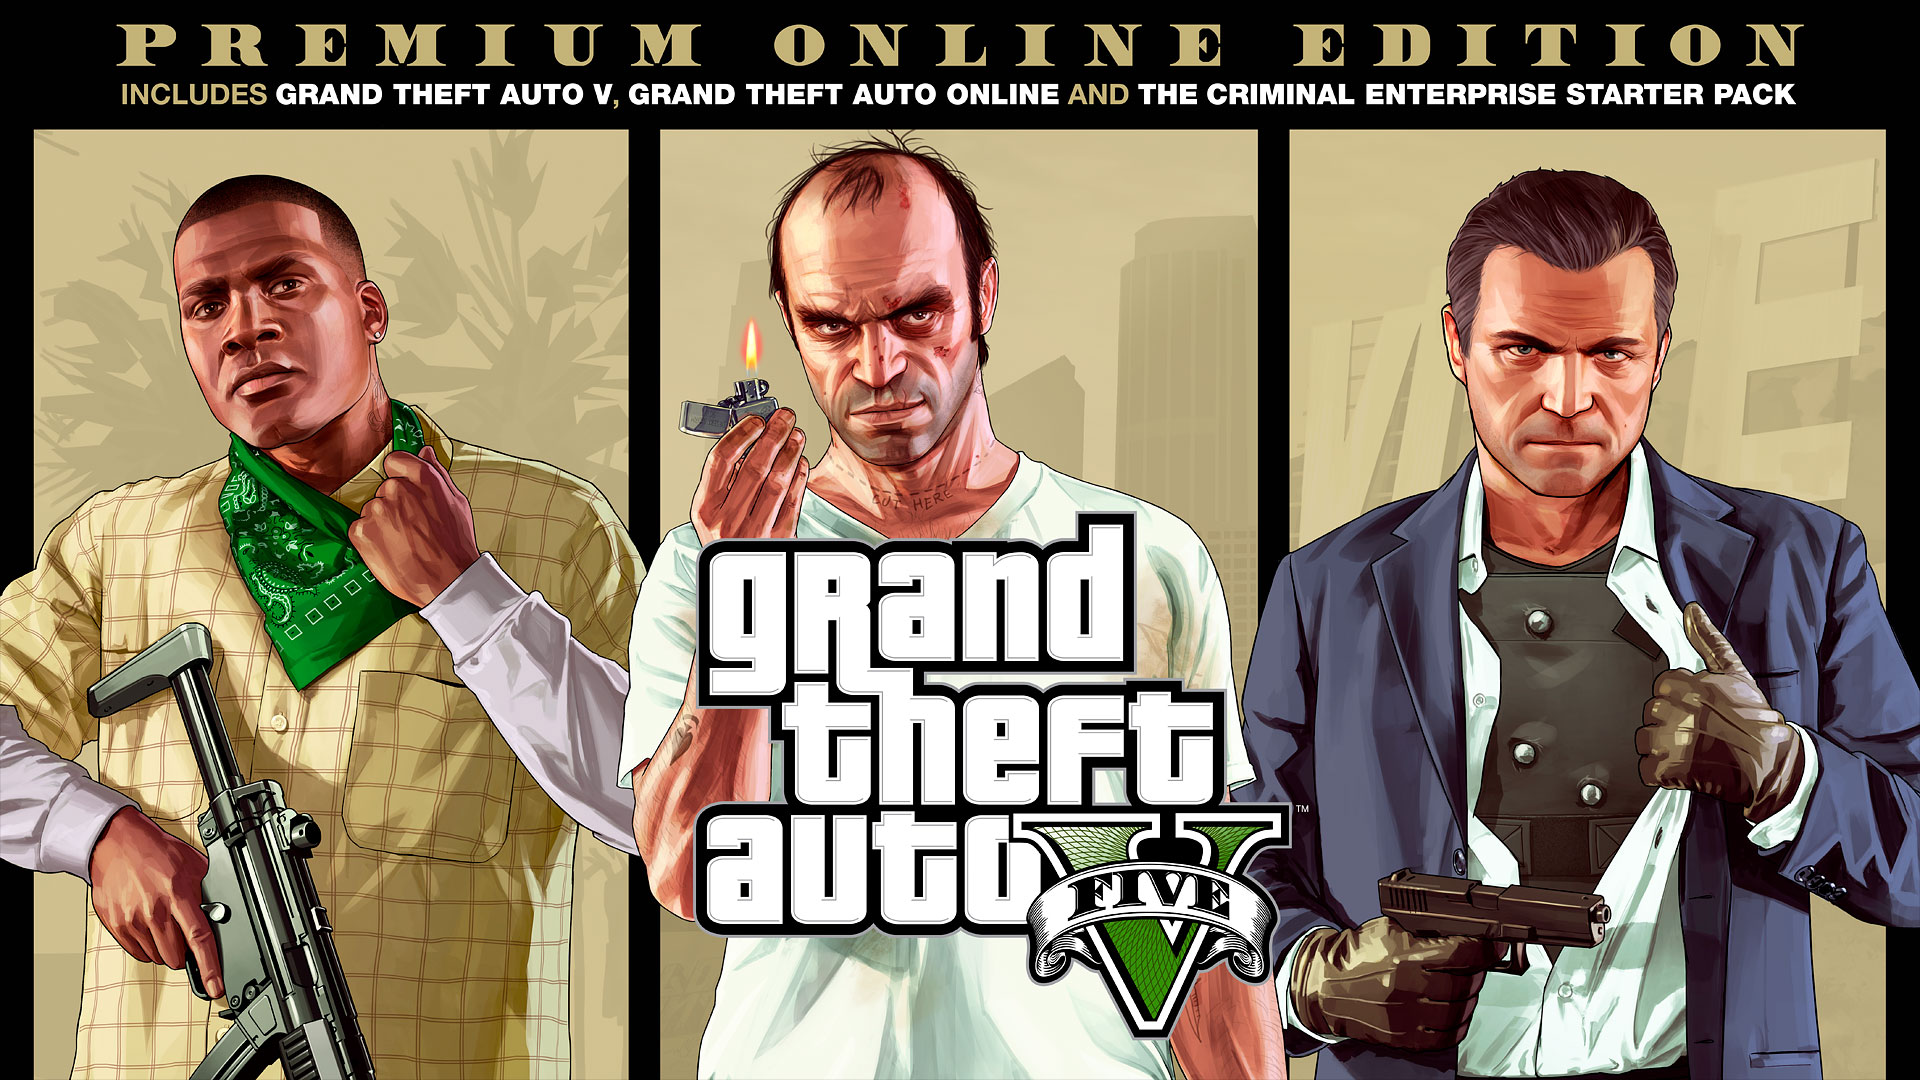 Get all the GTA 5 DLC you already have in the Premium Online Edition